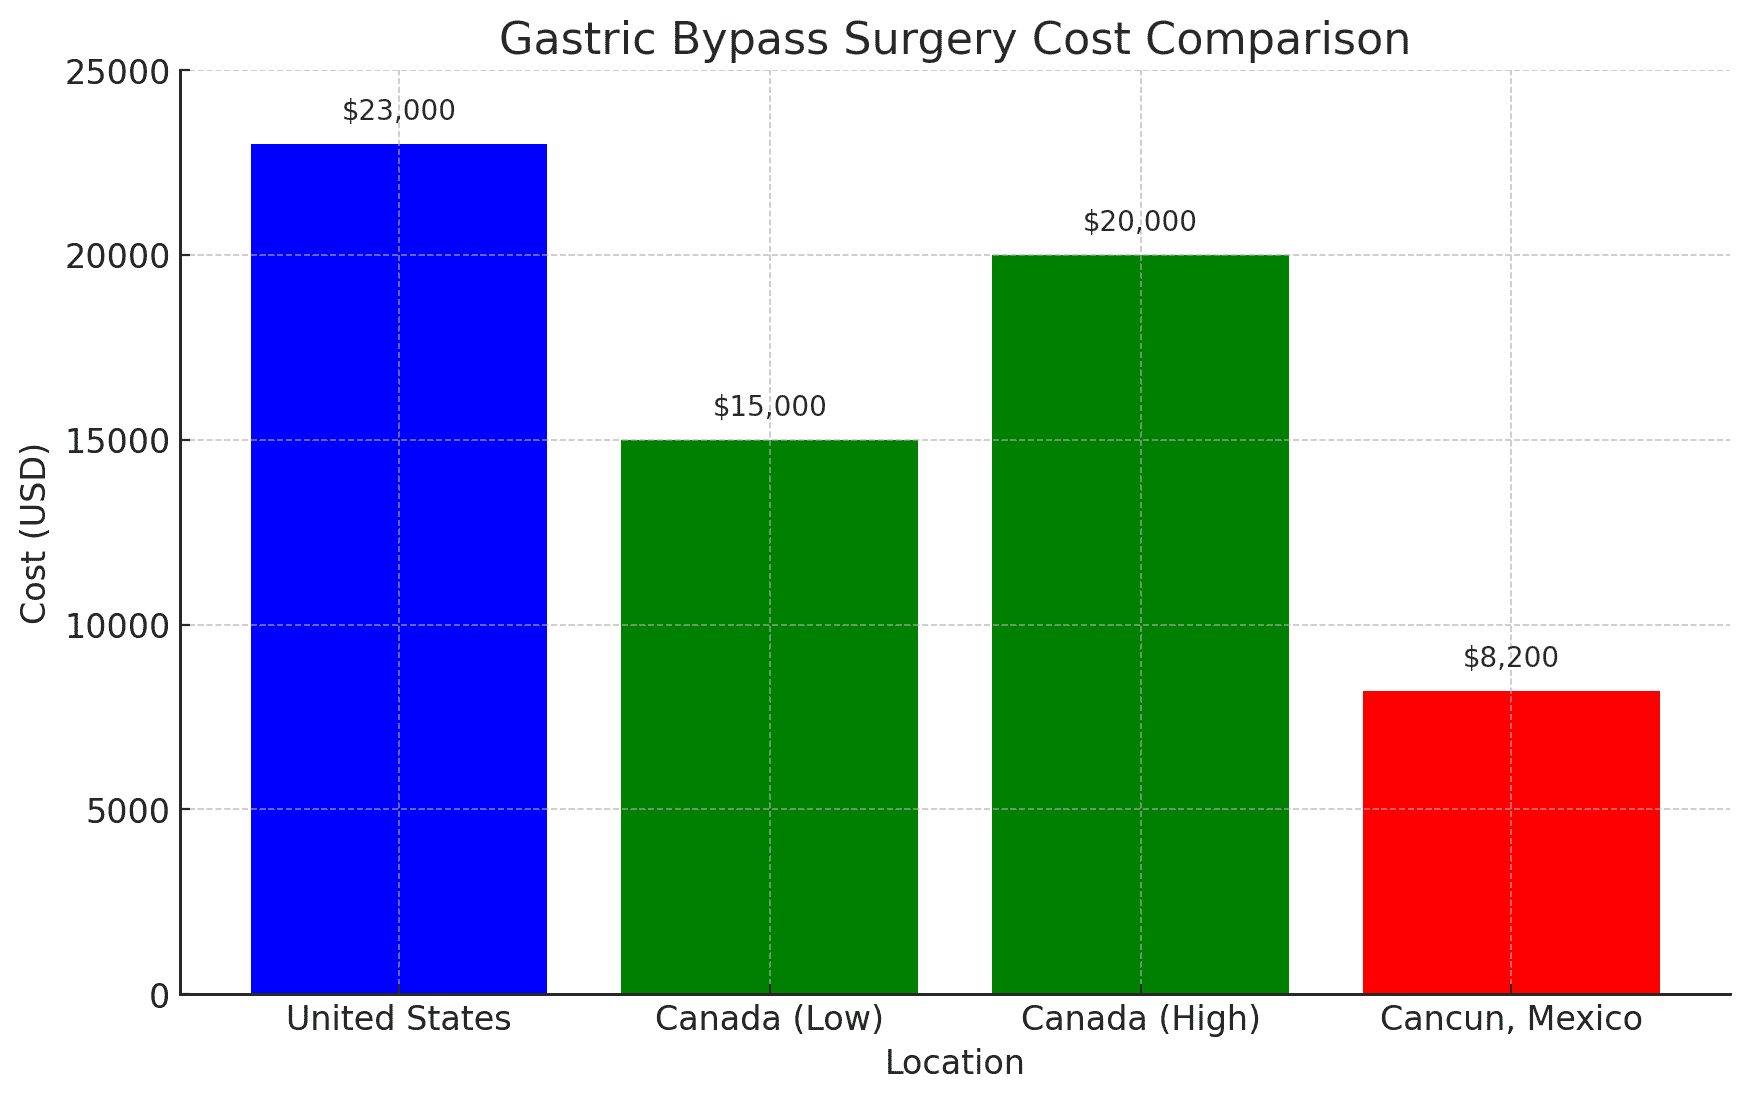 Graph Showing Gastric Bypass Surgery Cost Comparison for USA and Canada